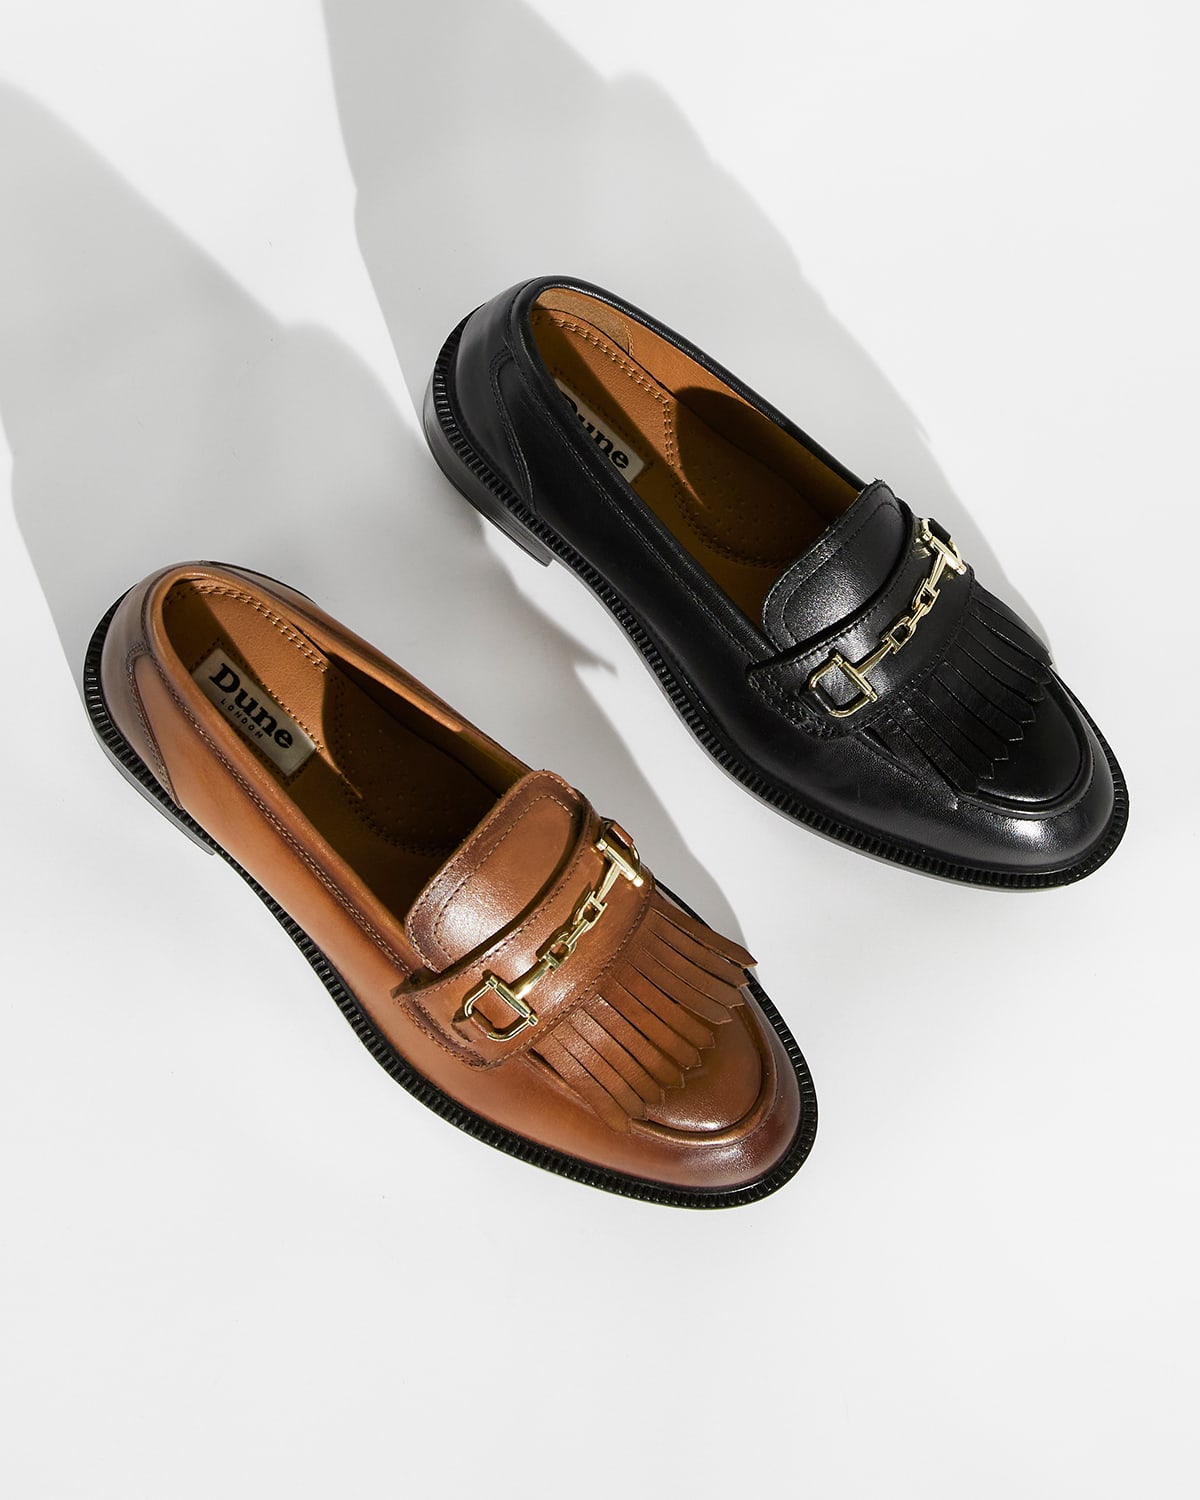 Key Loafer Styles Guided